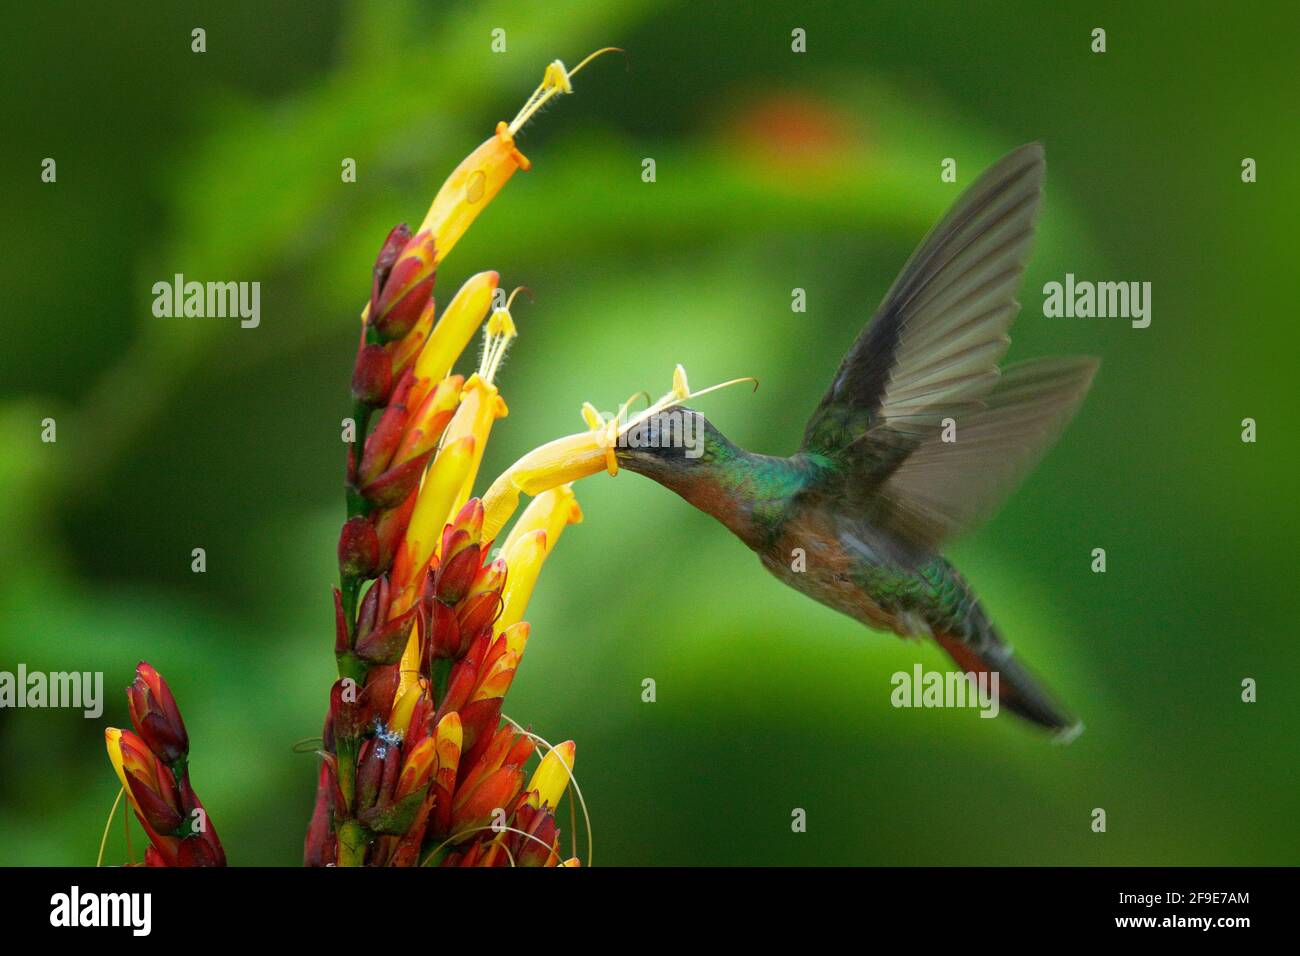 Action feeding scene in green tropical forest. Rufous-breasted hairy hermit, Glaucis hirsutus, hummingbird from Trinidad and Tobago. Green bird flying Stock Photo